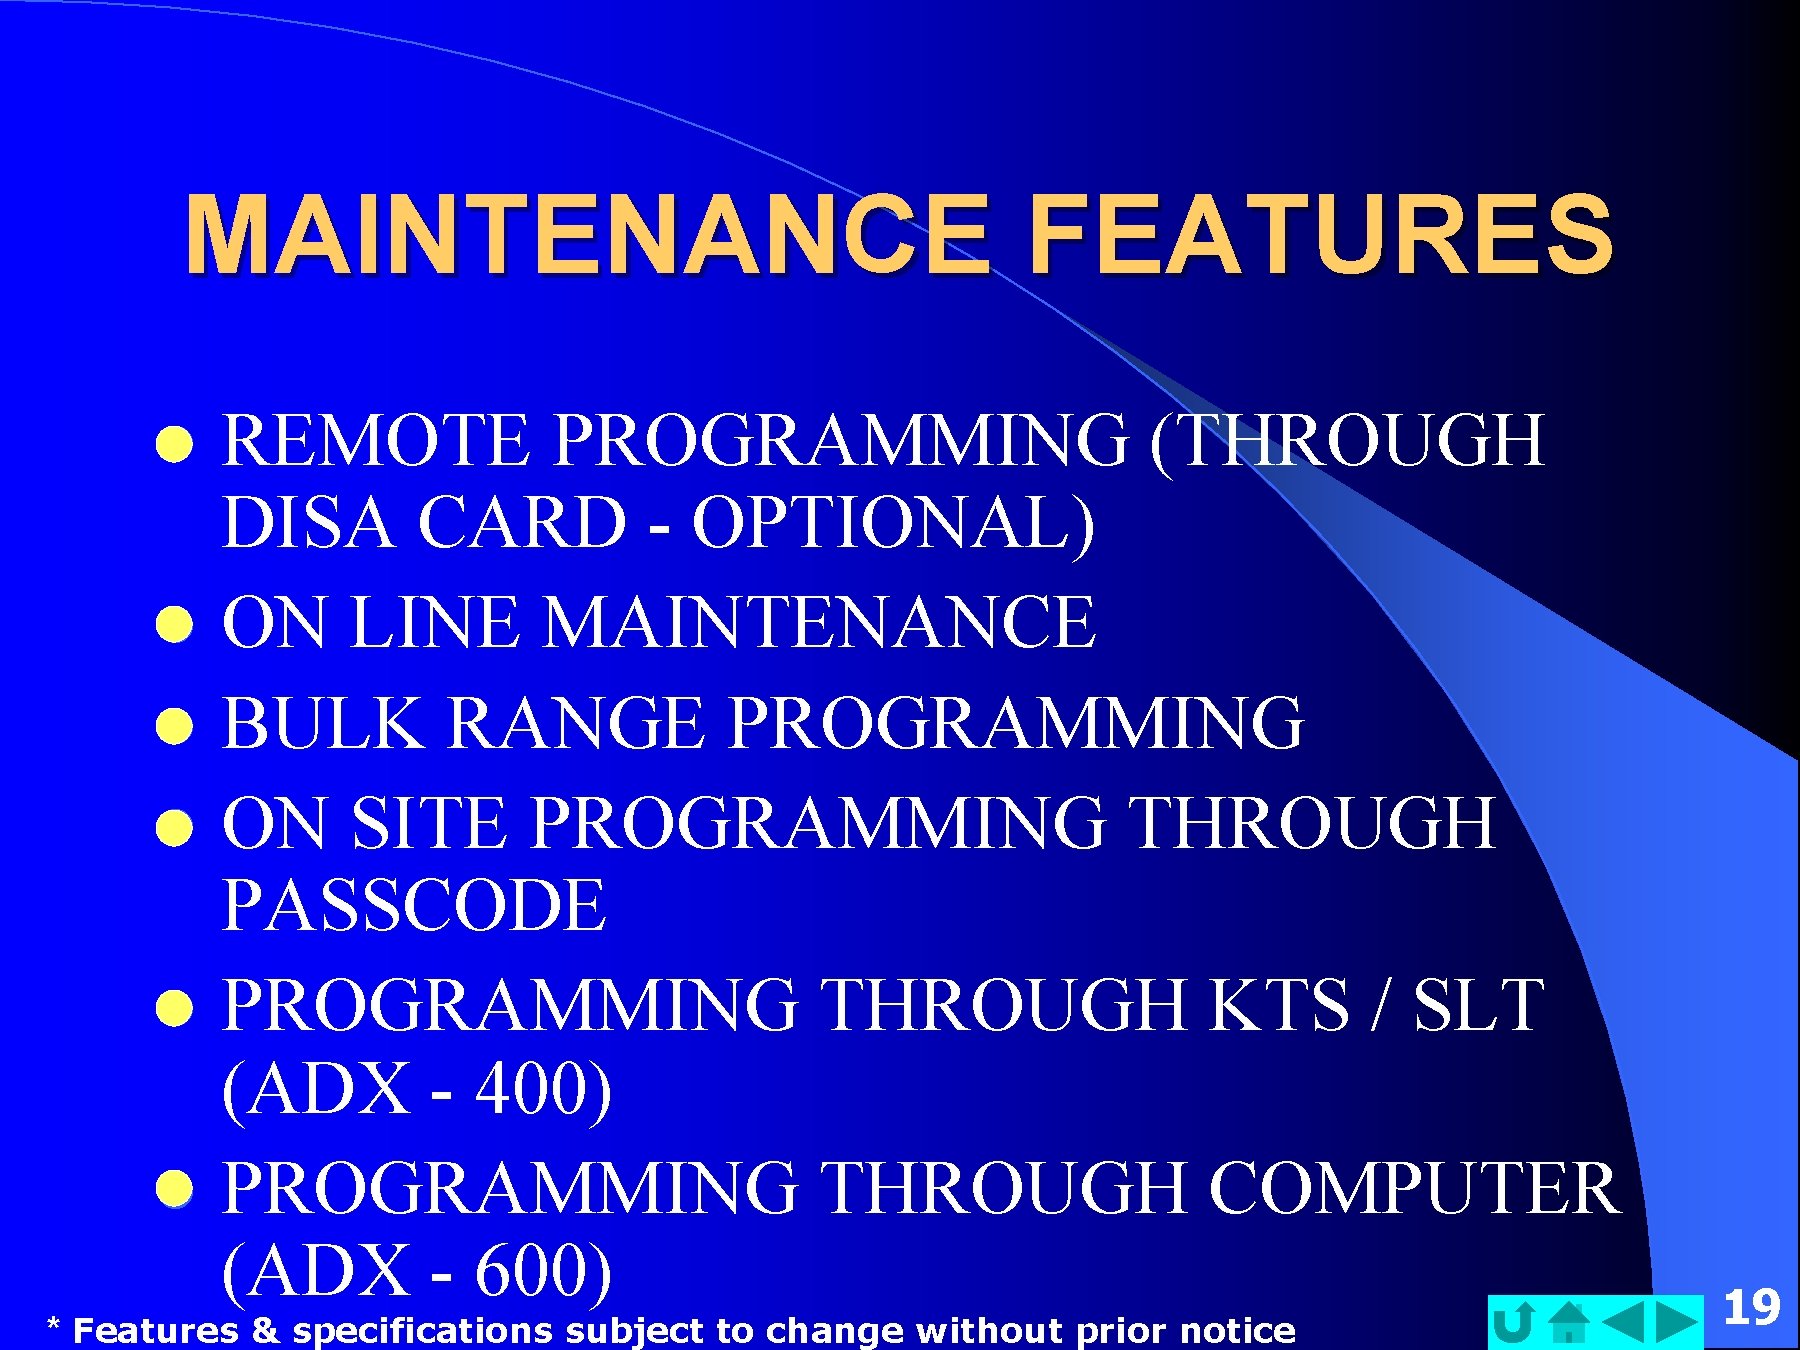 MAINTENANCE FEATURES REMOTE PROGRAMMING (THROUGH DISA CARD - OPTIONAL) l ON LINE MAINTENANCE l